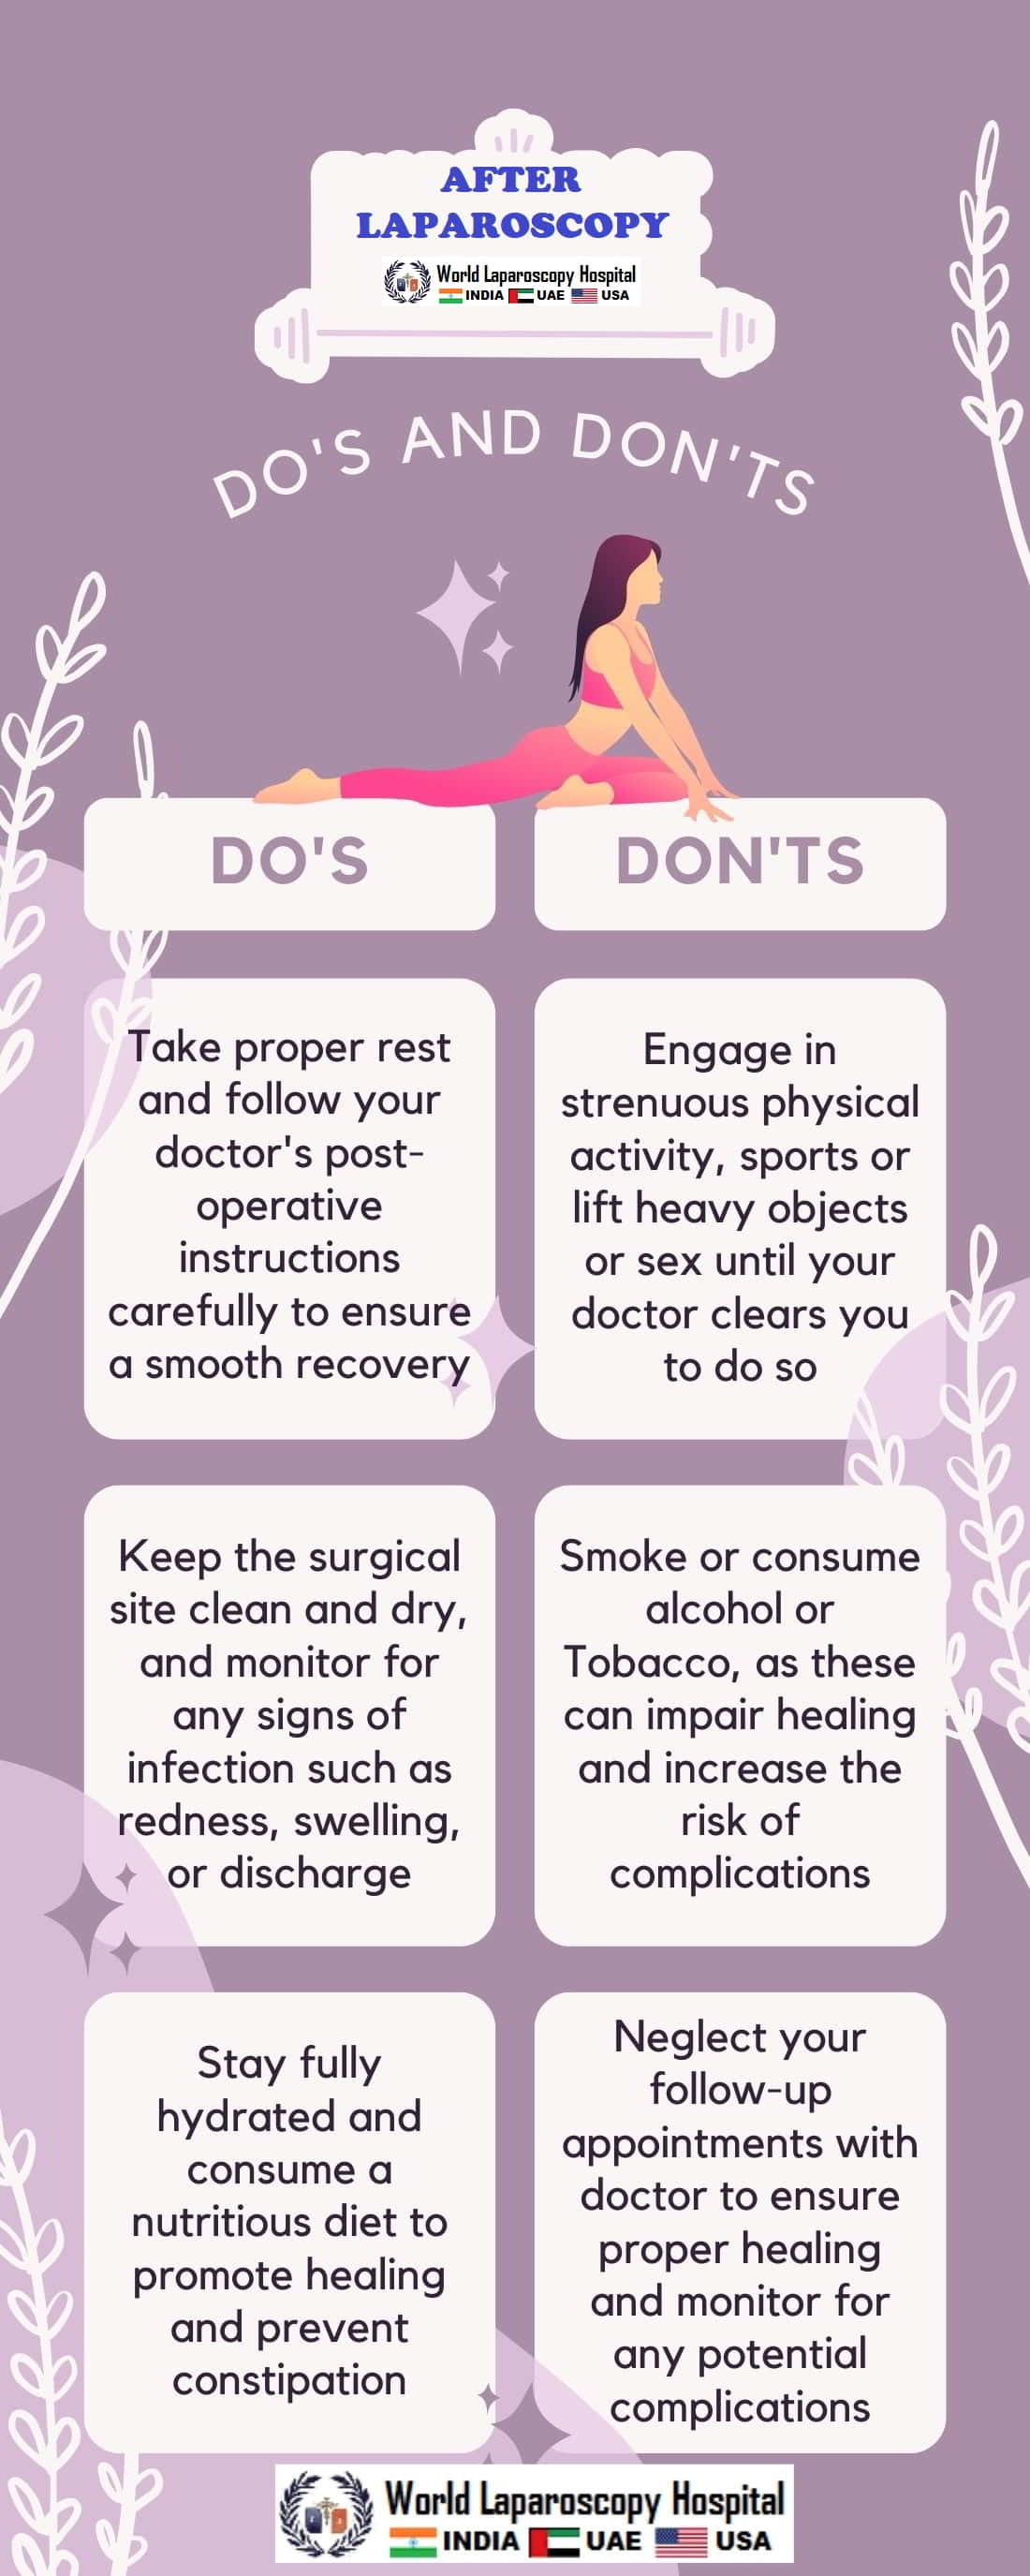 Do's and Don'ts after Laparoscopic Surgery